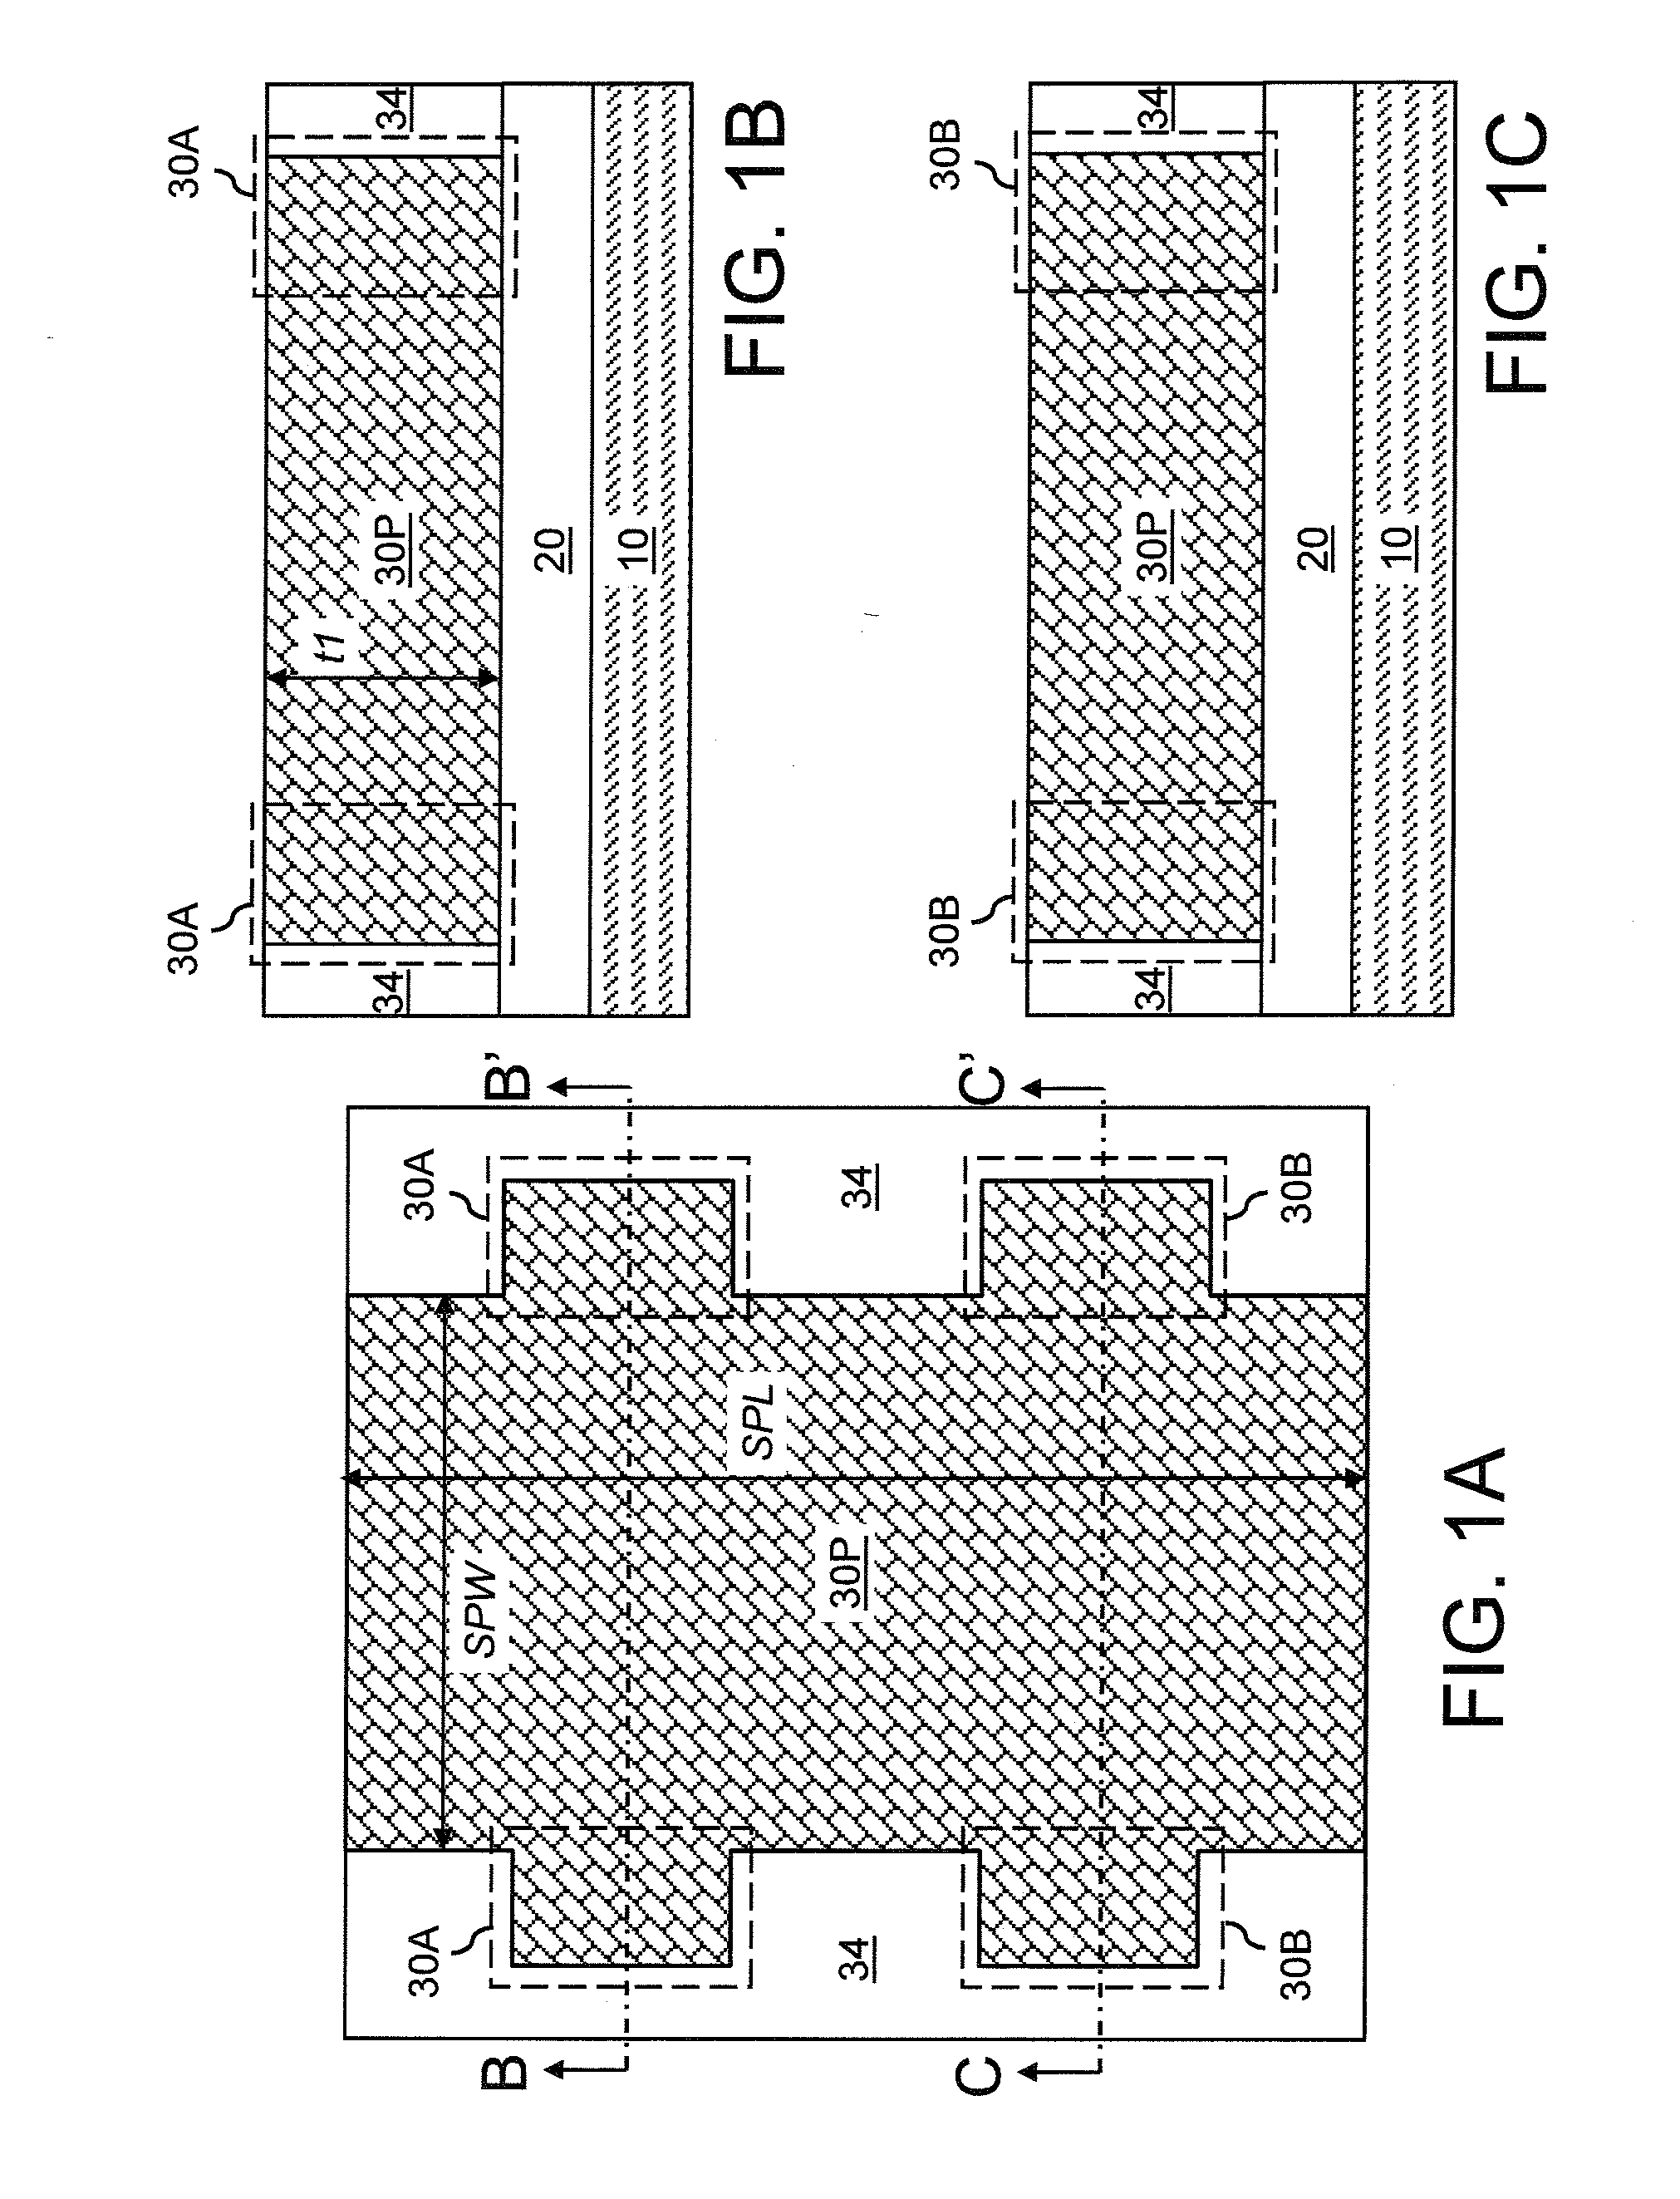 Temperature control device for optoelectronic devices